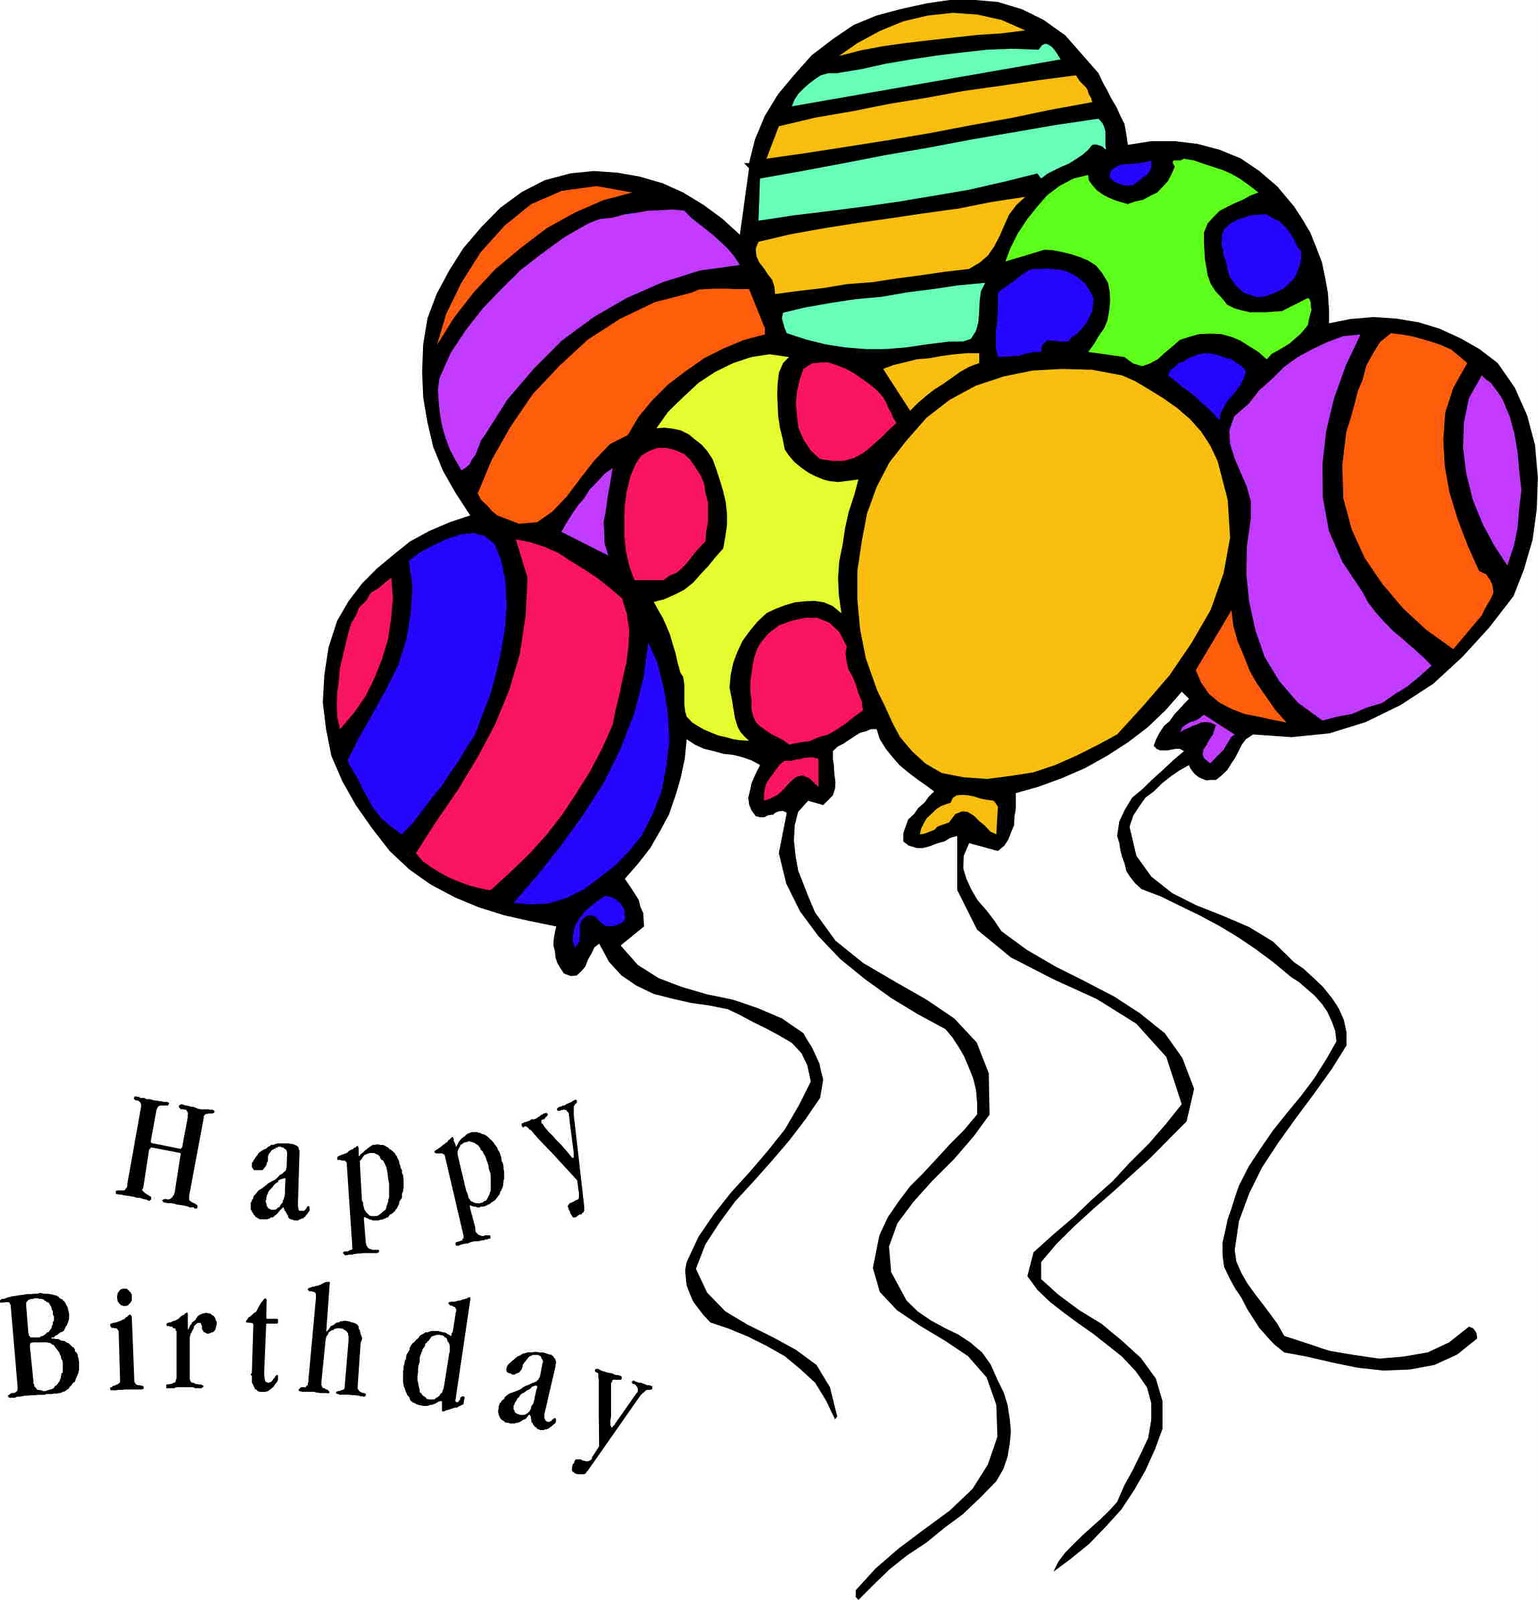 free-birthday-balloons-clip-art-pictures-clipartix